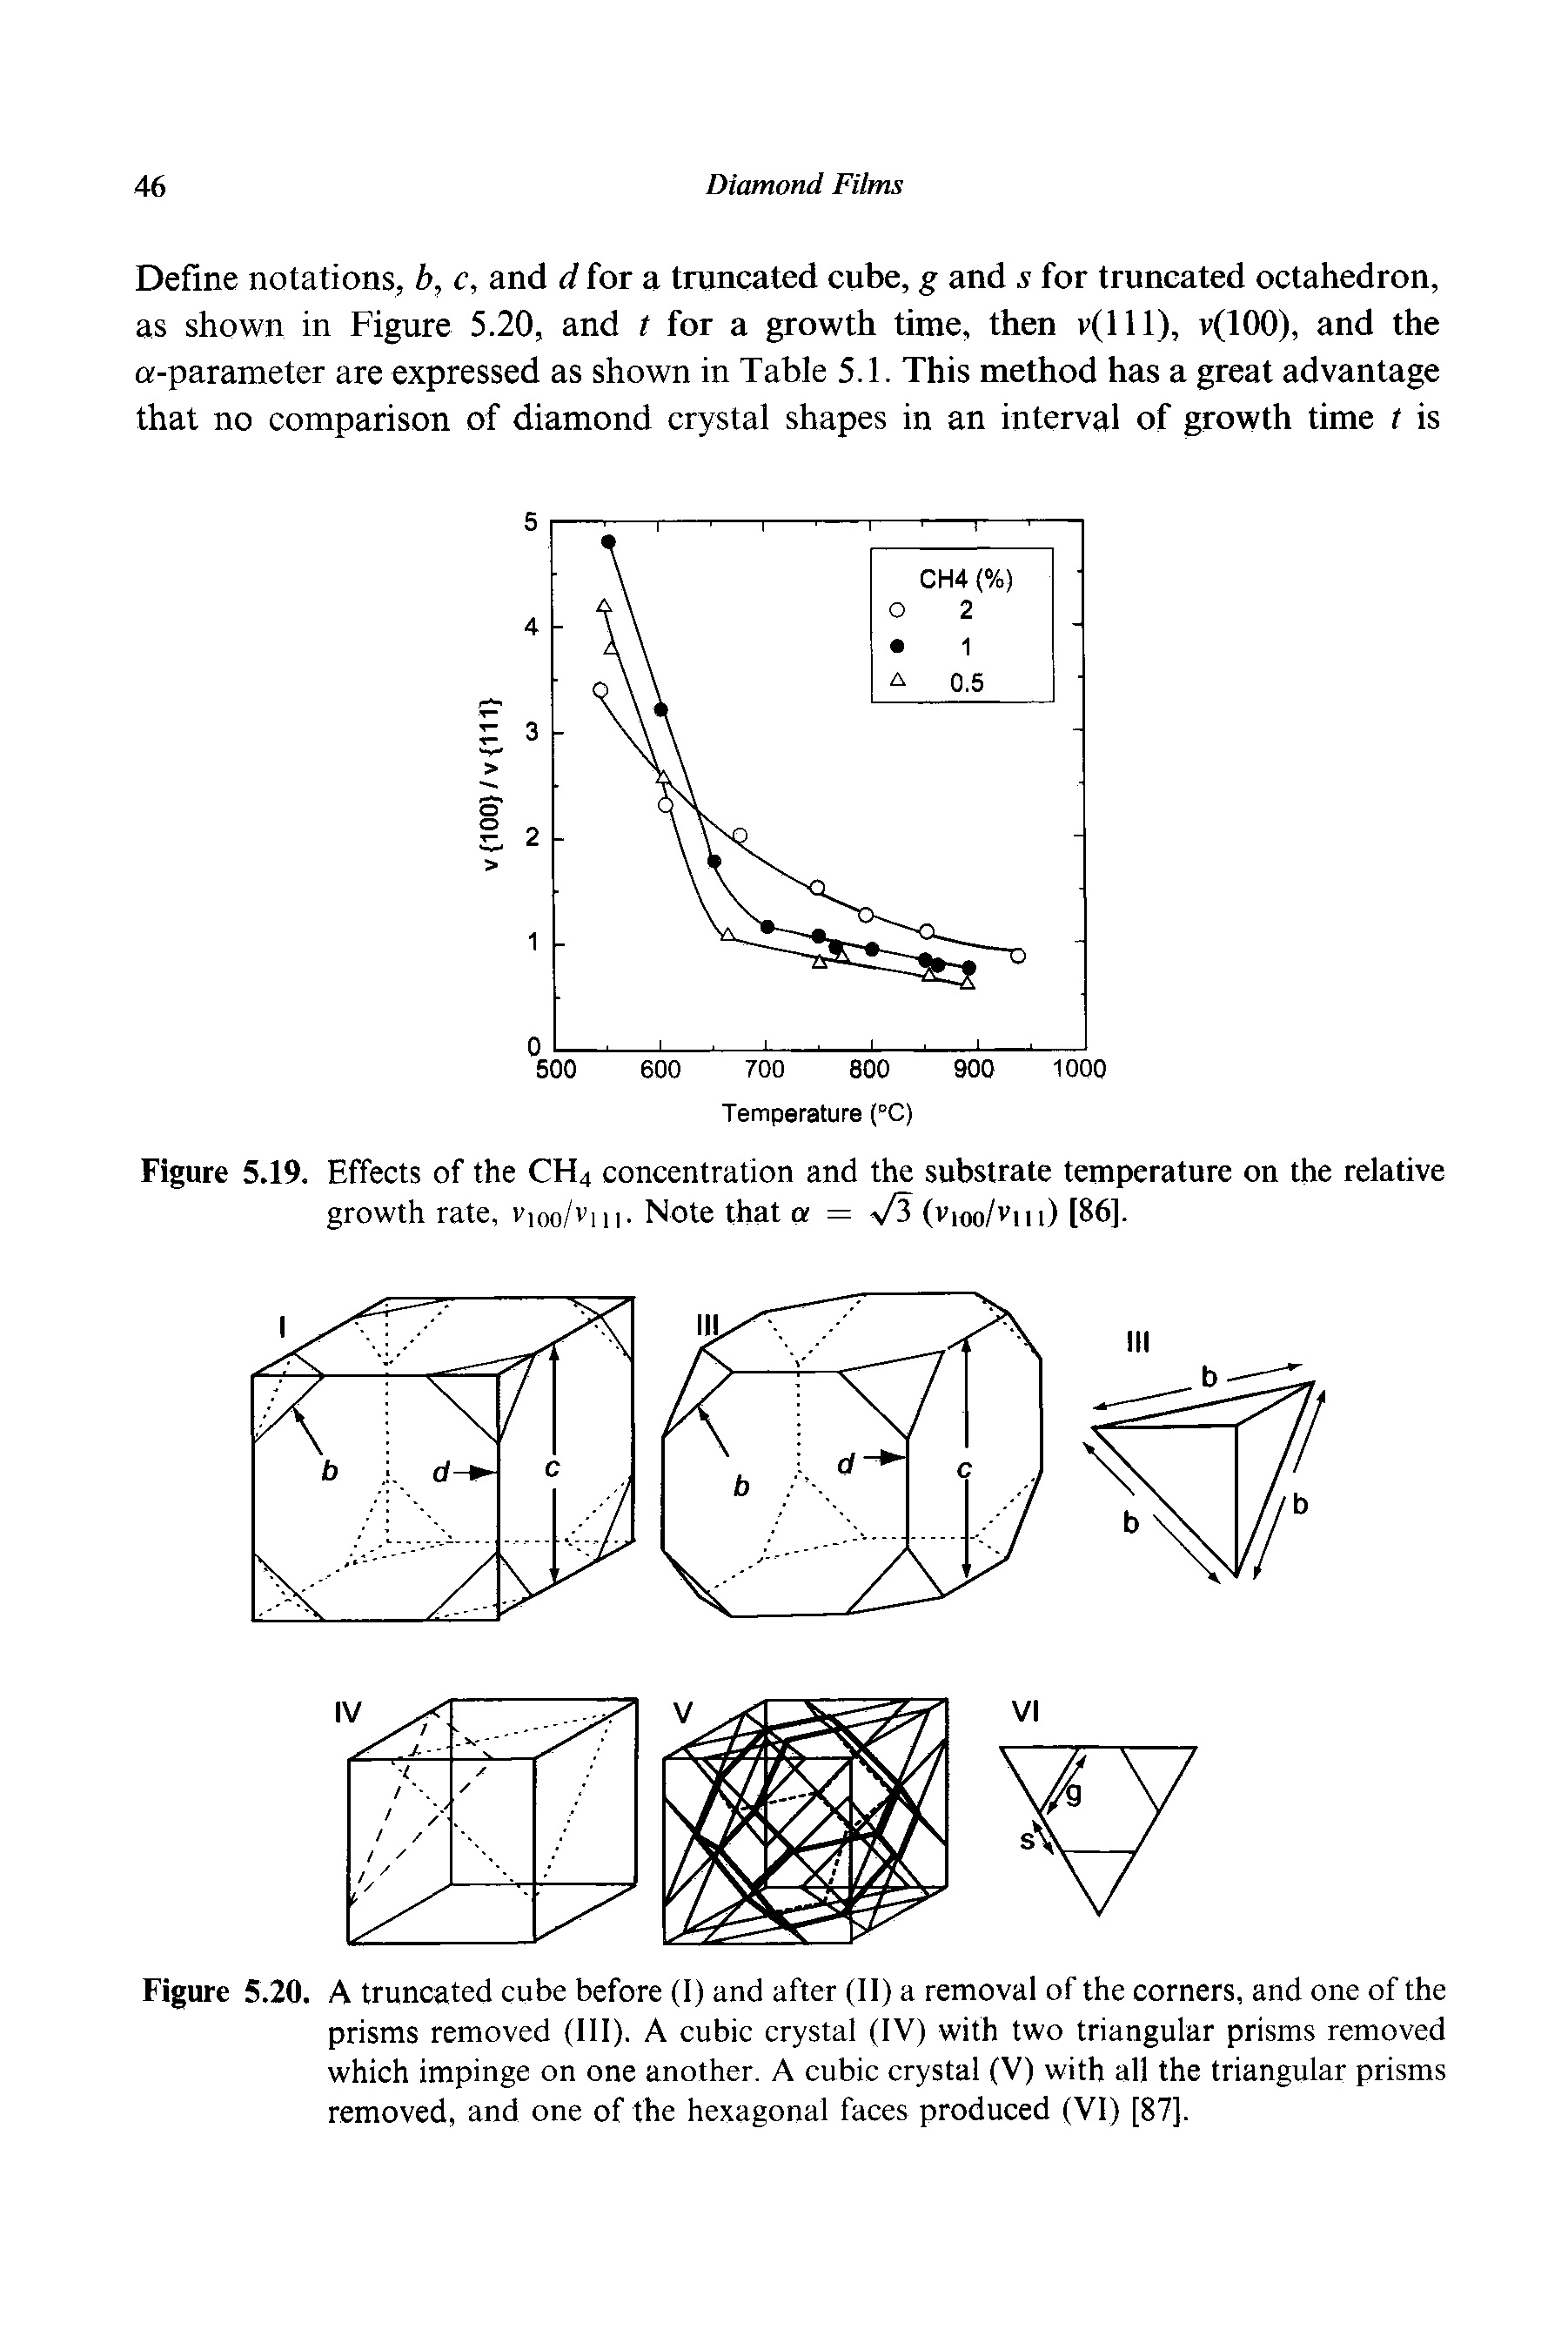 Figure 5.20. A truncated cube before (I) and after (II) a removal of the corners, and one of the prisms removed (ill). A cubic crystal (IV) with two triangular prisms removed which impinge on one another. A cubic crystal (V) with all the triangular prisms removed, and one of the hexagonal faces produced (VI) [87].